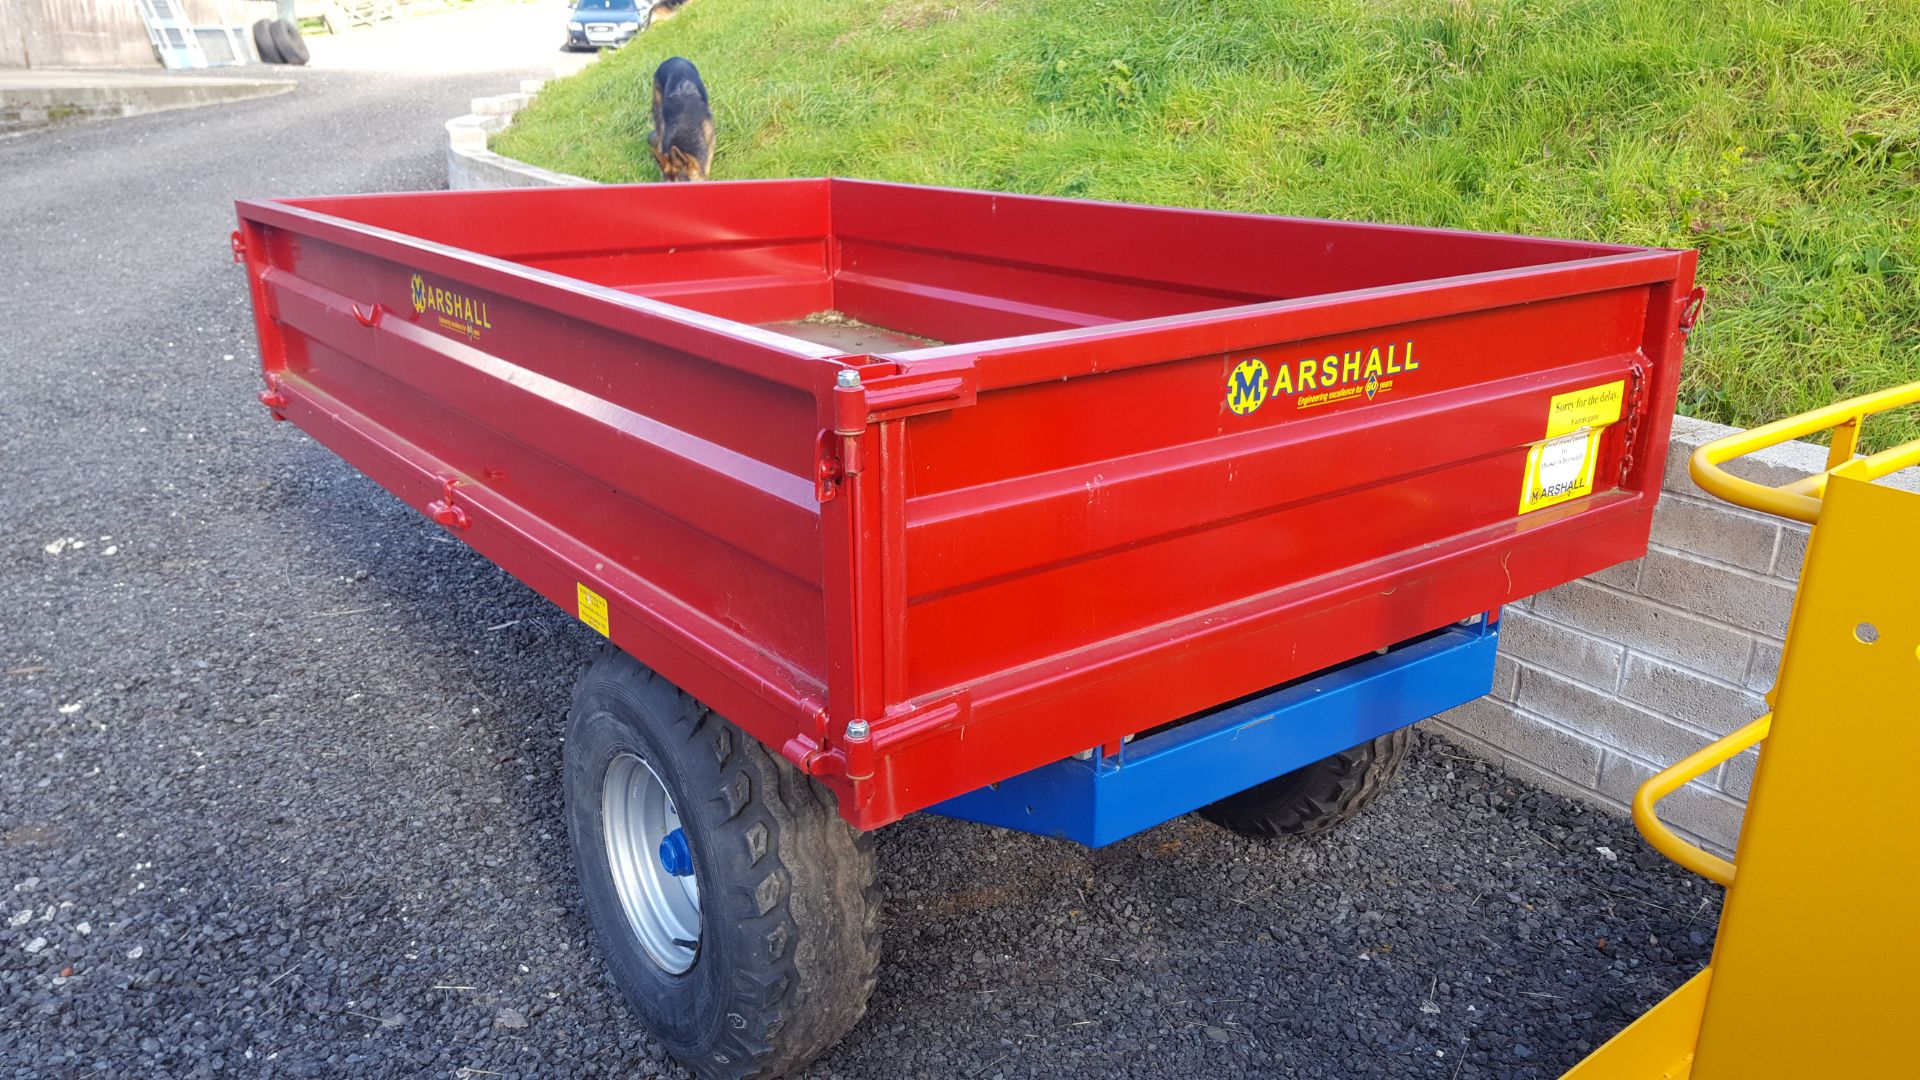 2016 Marshall 2 Ton Tipping Trailer with dropsides - Image 2 of 2